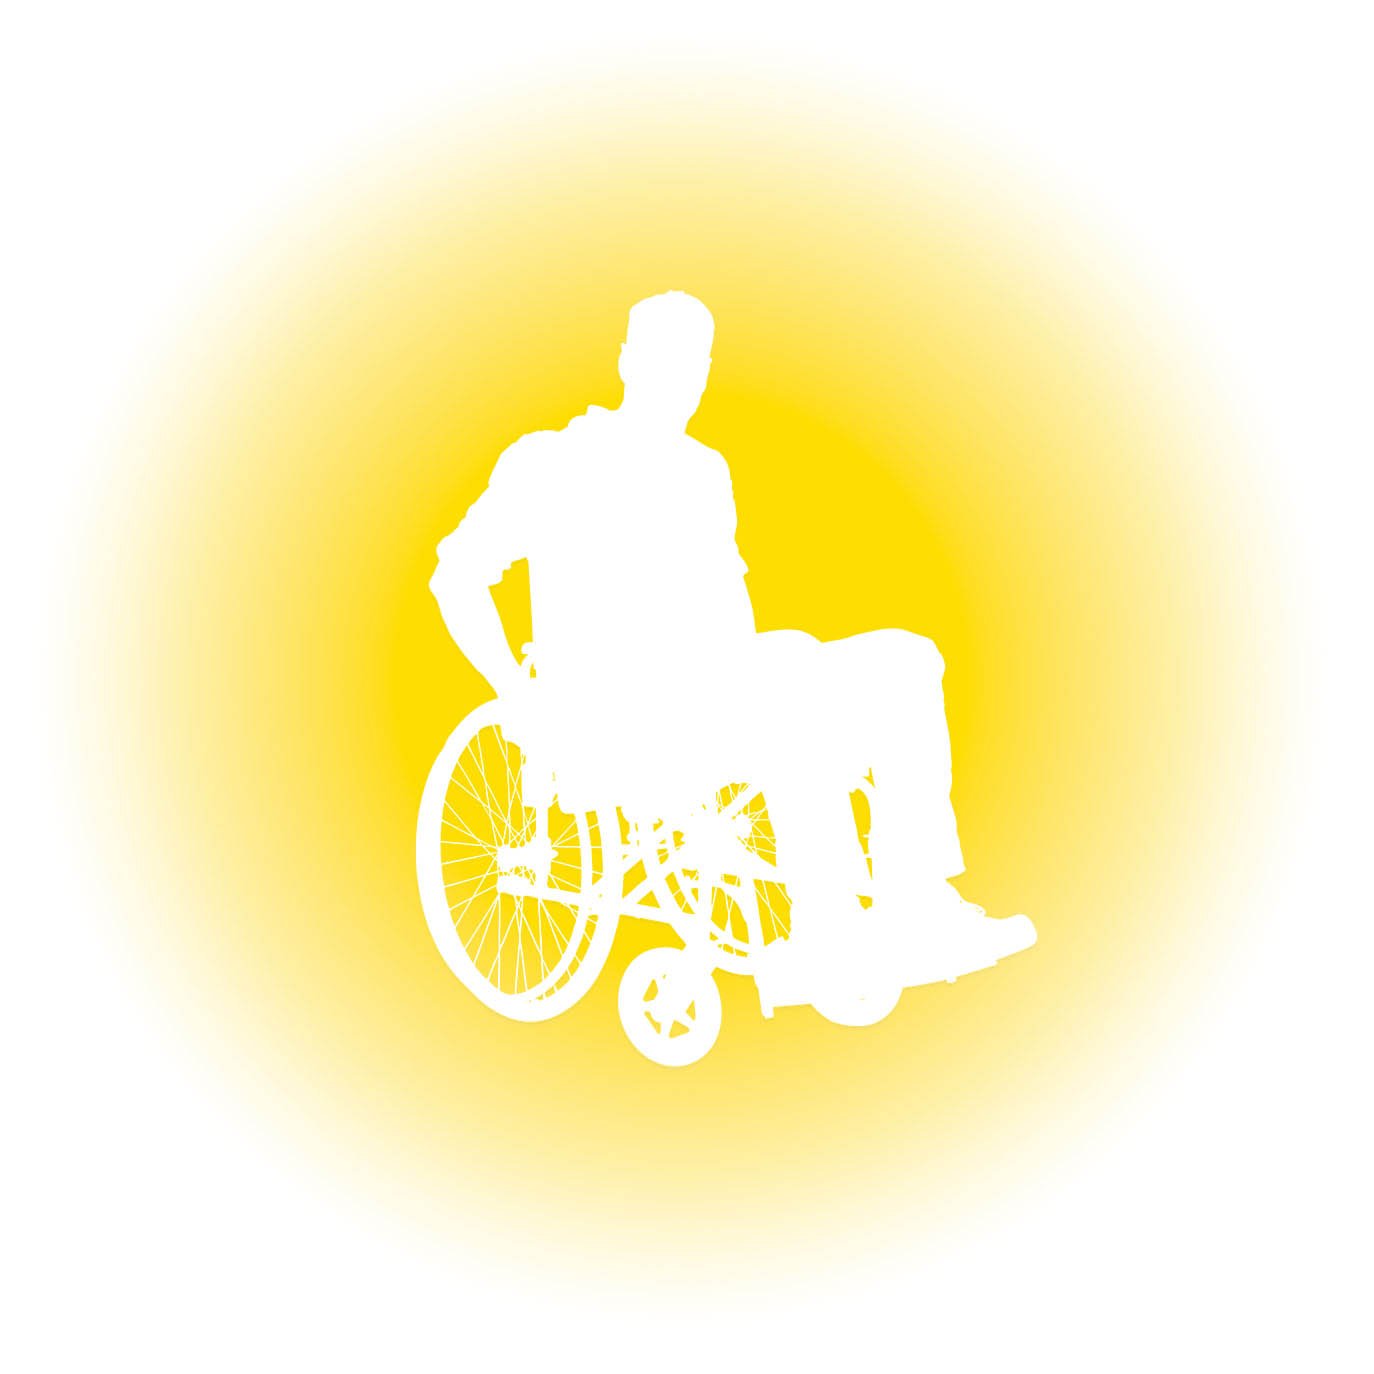 Disability Insurance Policies